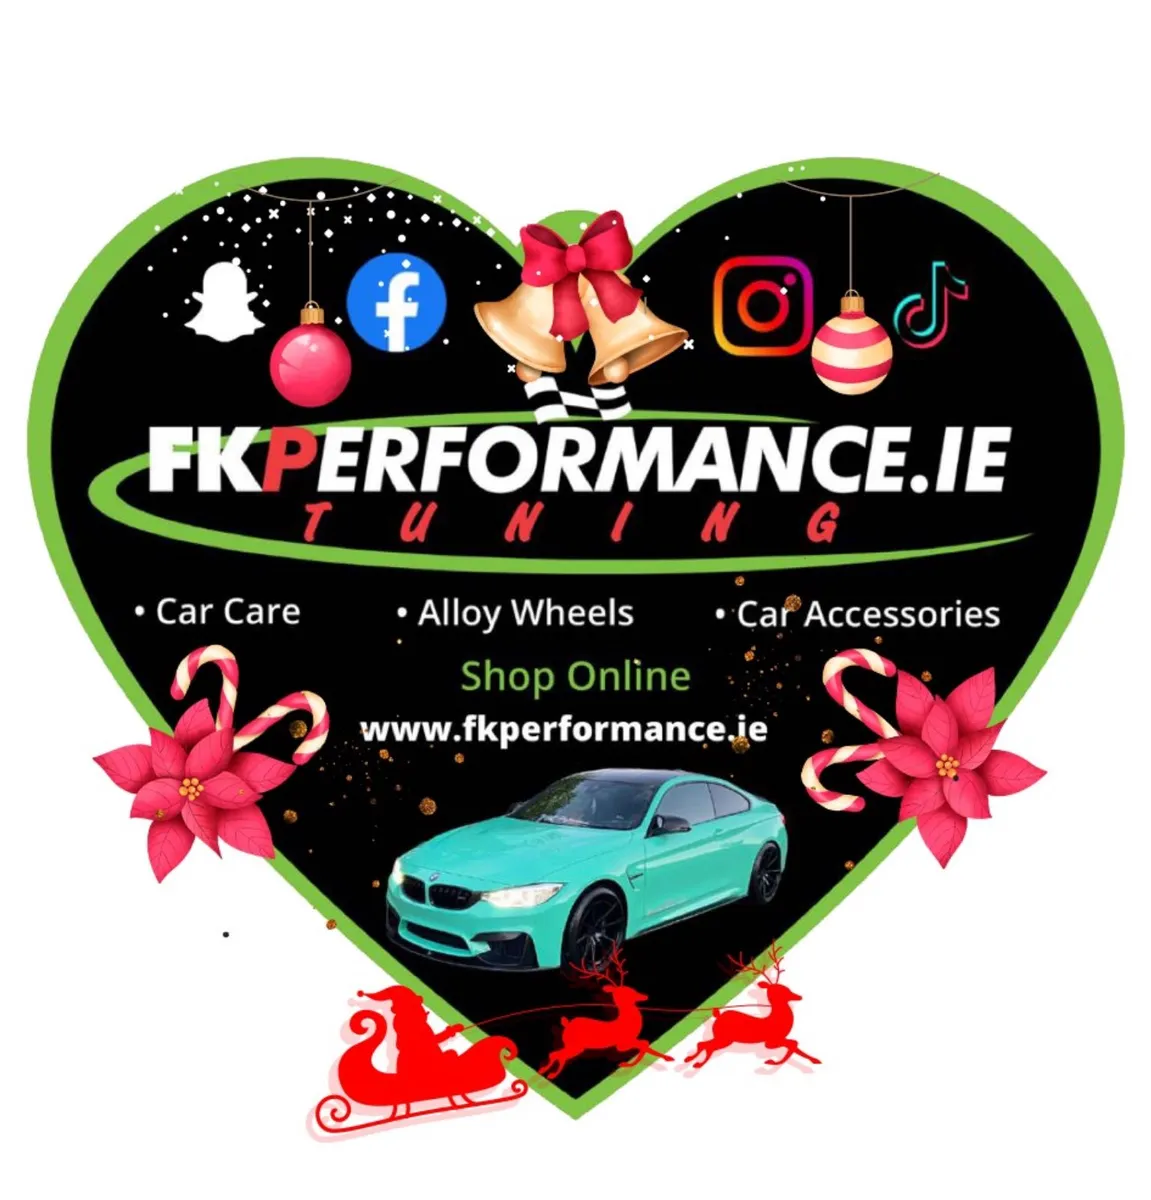 Ultimate gift ideas at fk performance - Image 1